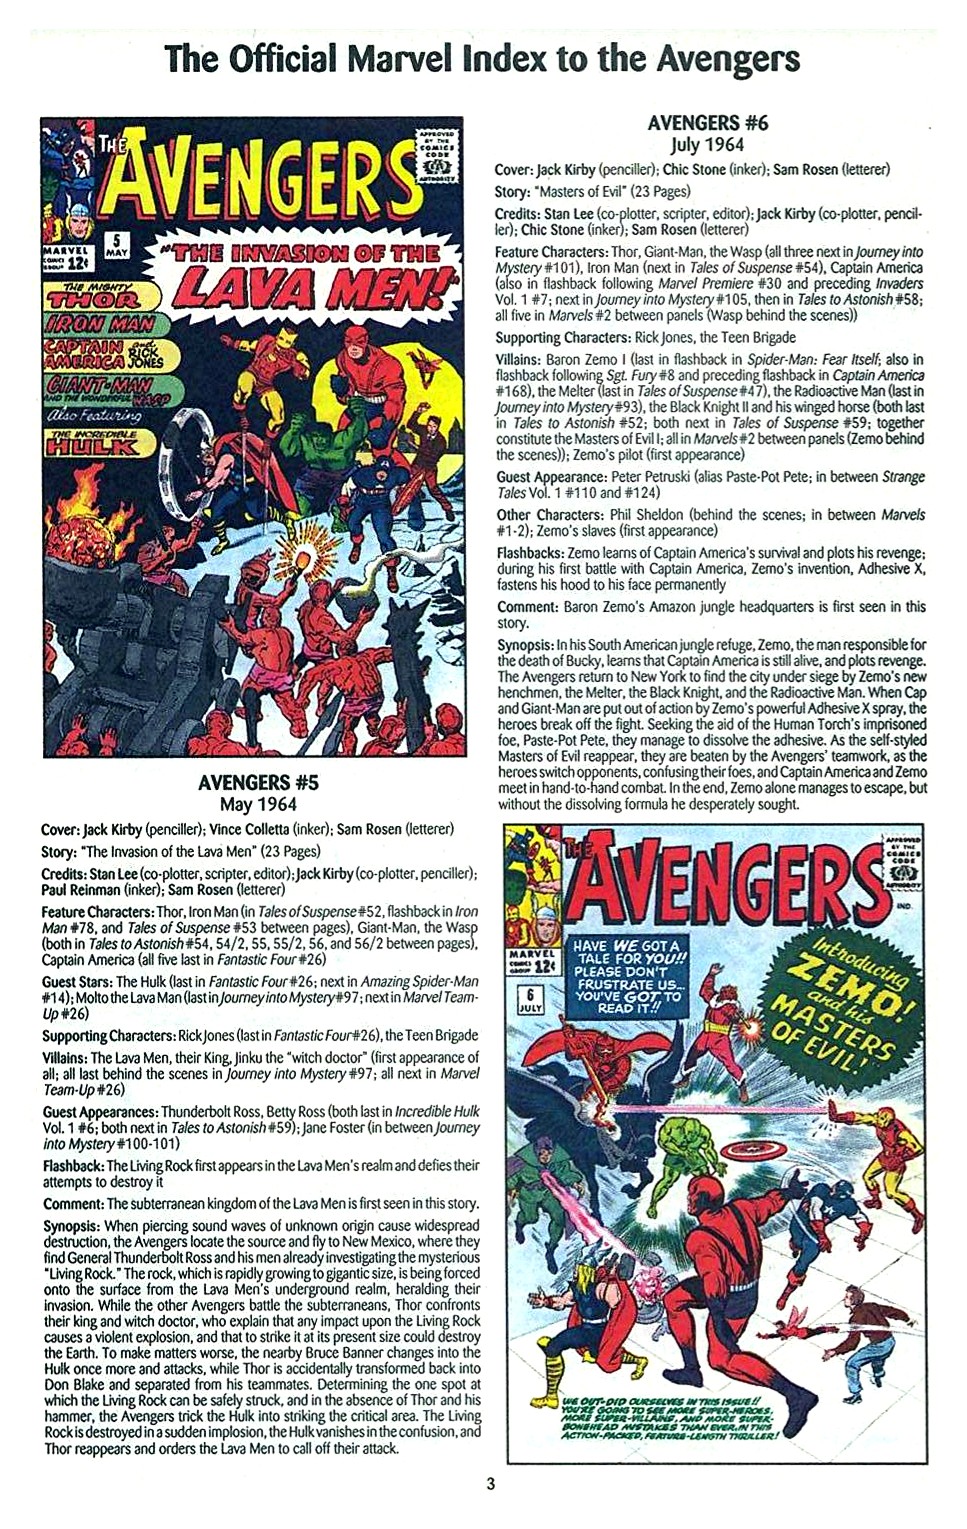 Read online The Official Marvel Index to the Avengers comic -  Issue #1 - 5